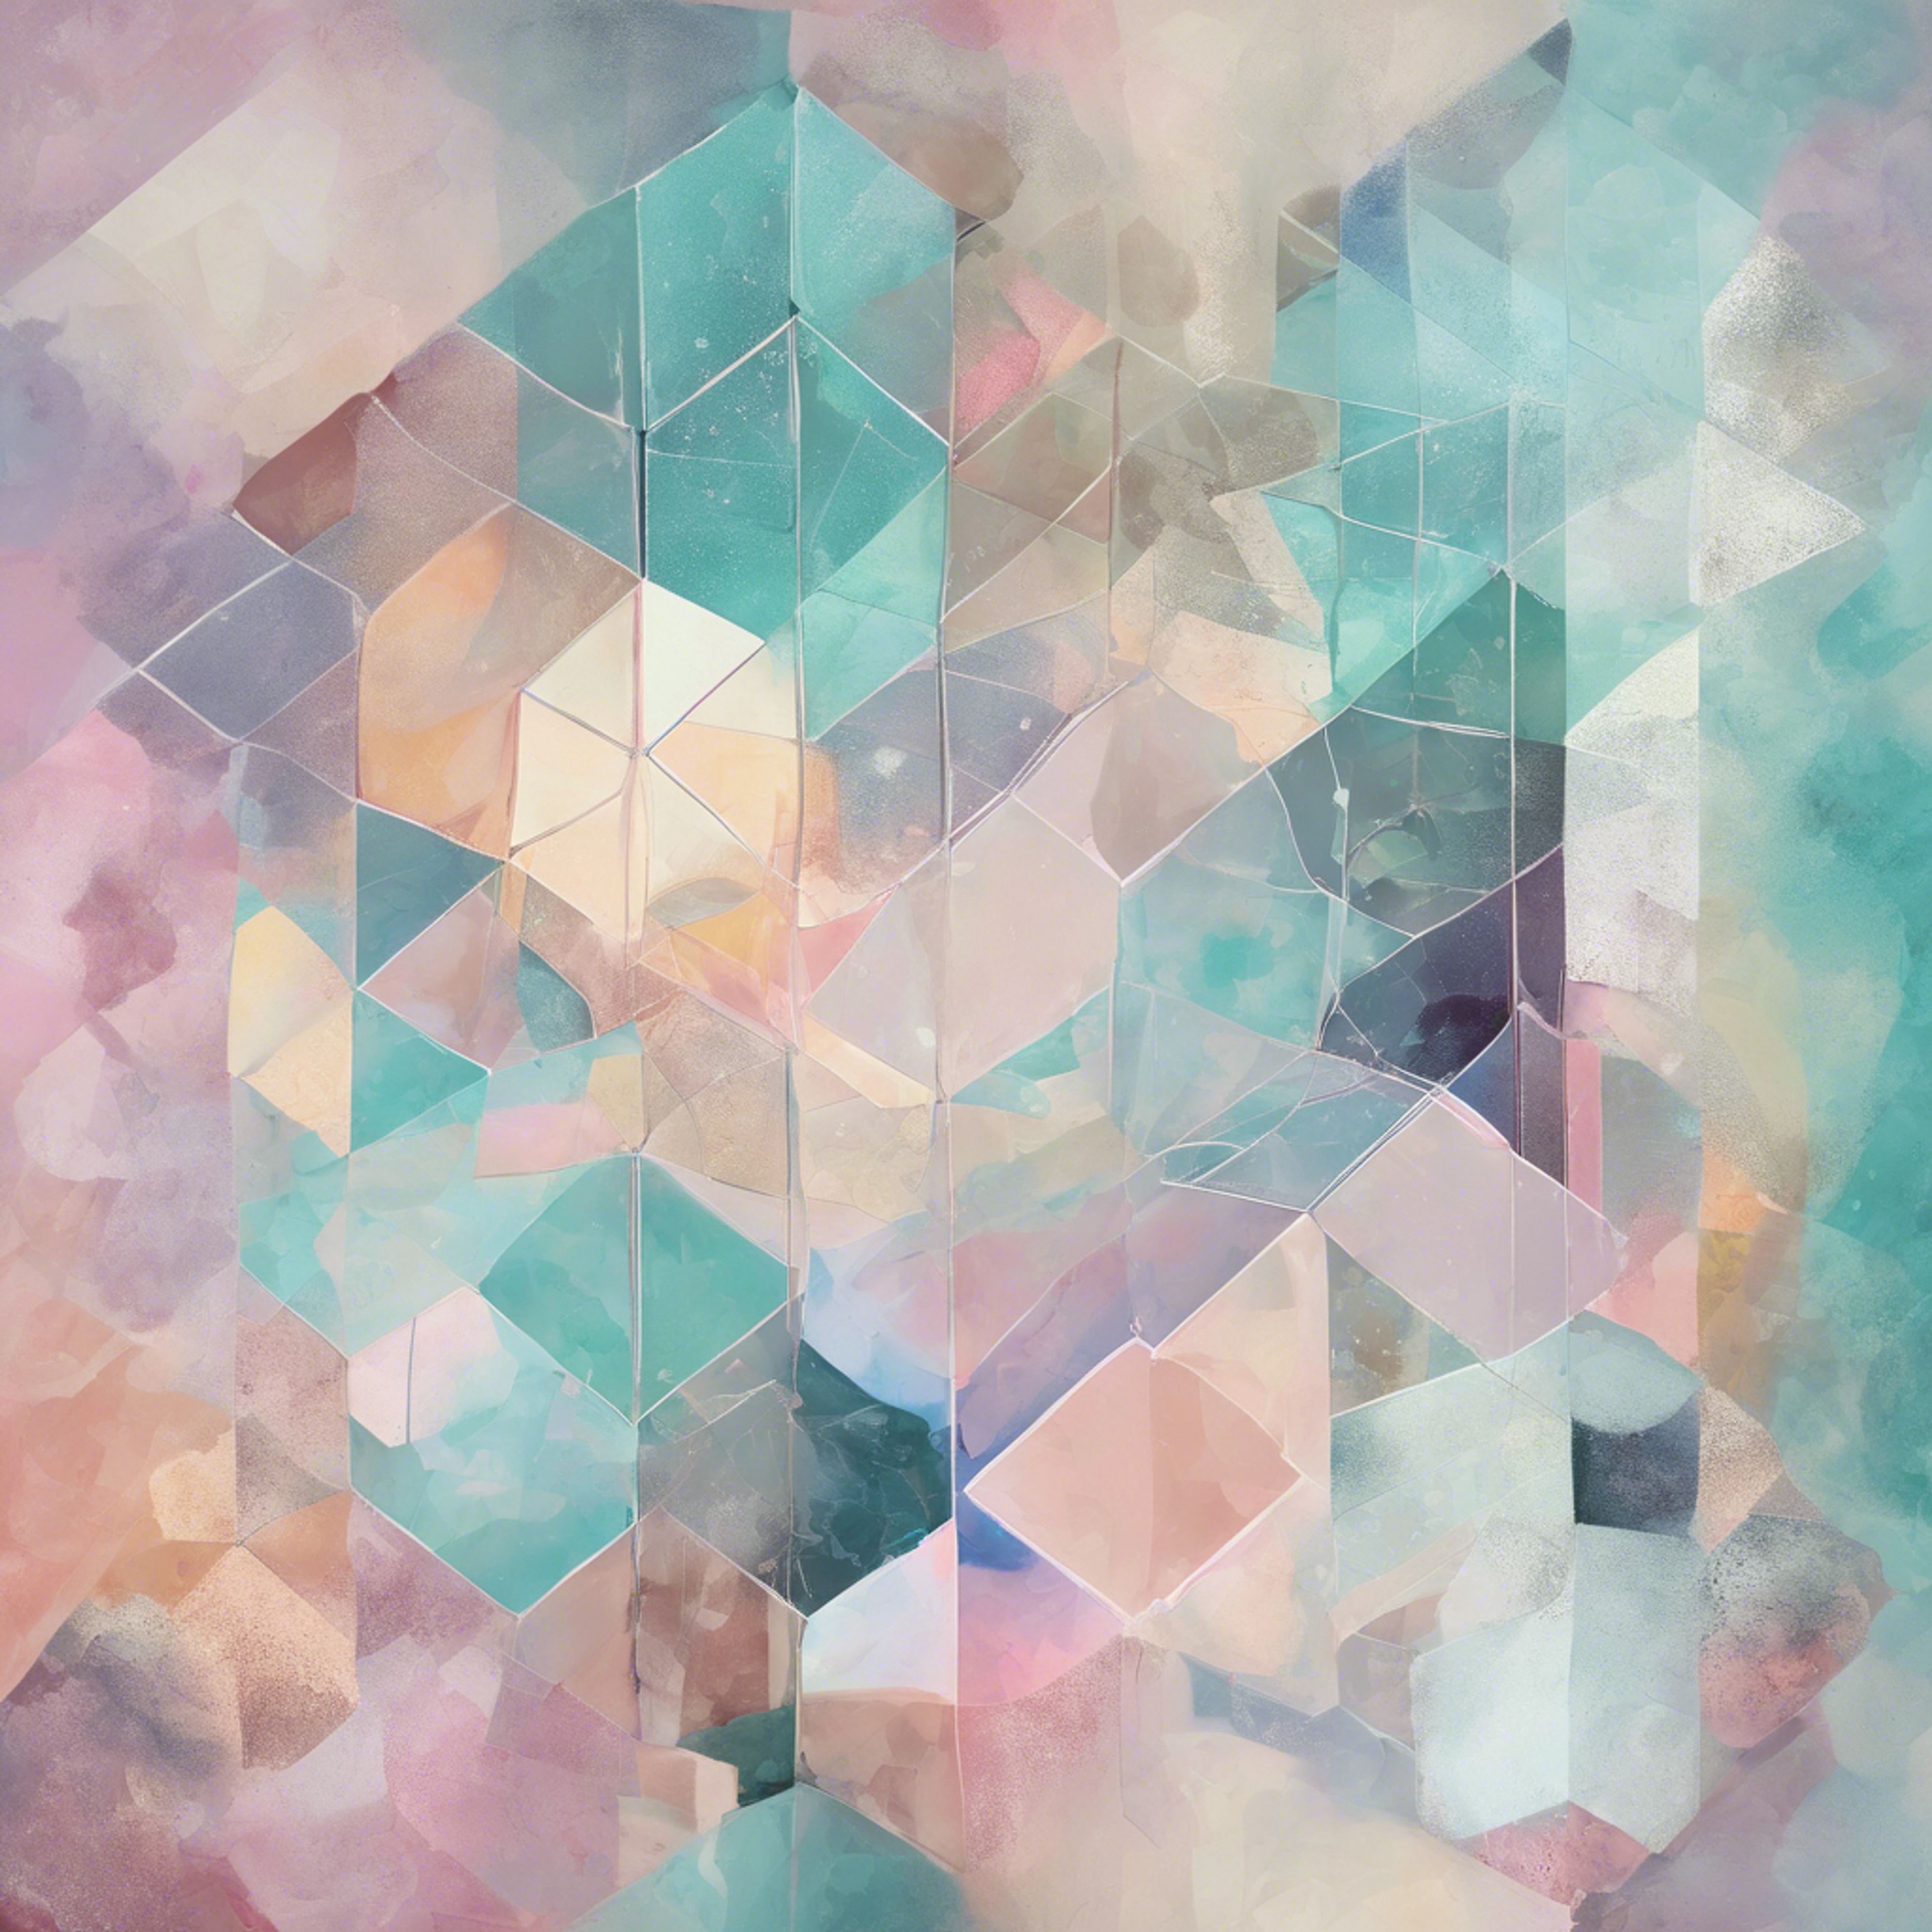 A cool pastel colored abstract painting emphasizing geometric patterns. Ფონი[4610bdb5de564f779c91]